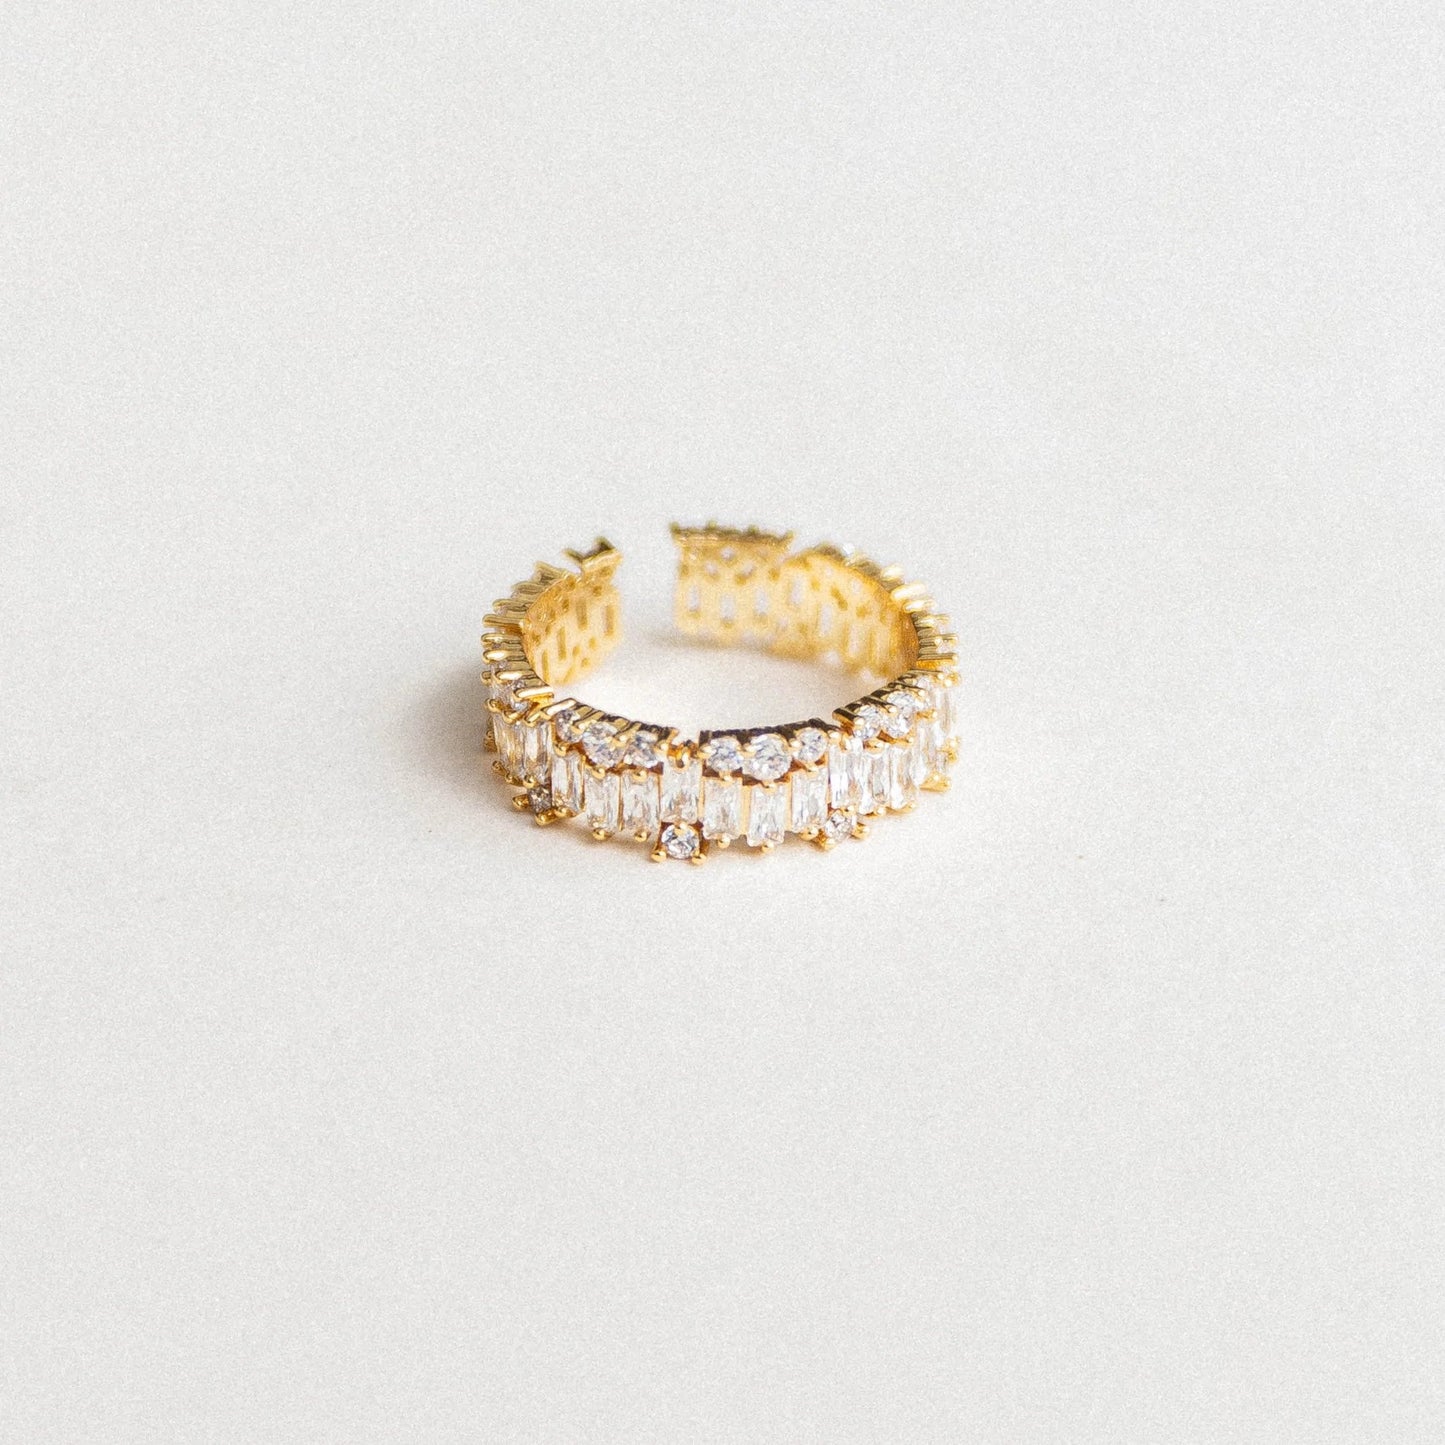 Memory Ring from Very Good Jewels